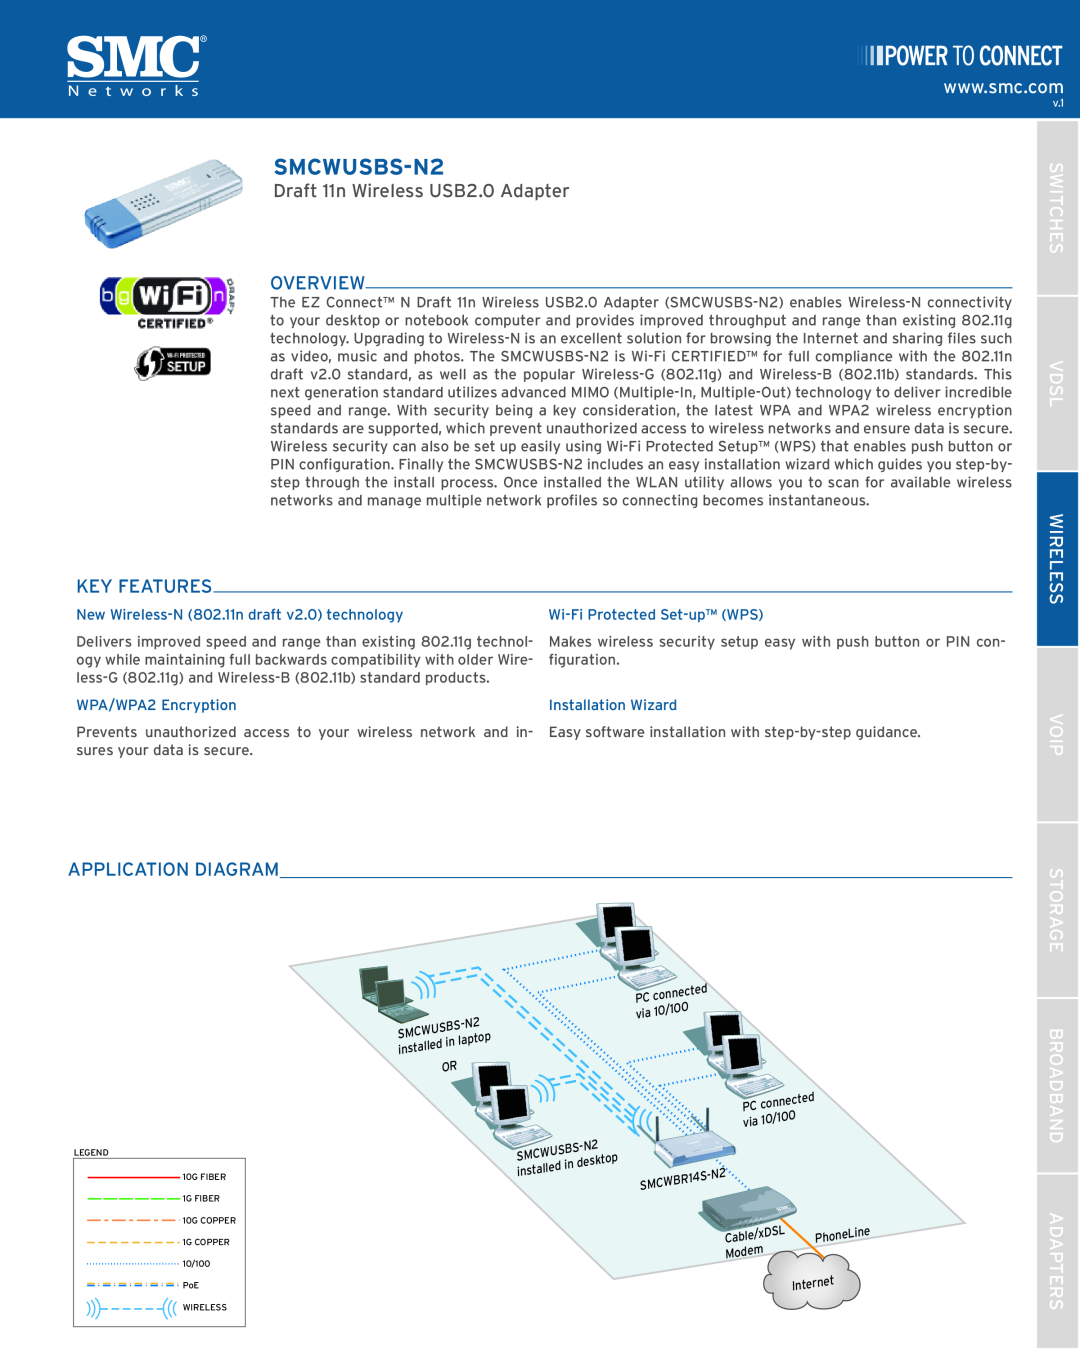 SMC Networks SMCWUSBS-N2 manual Overview, Key Features, Switches Vdsl Wireless Voip, Application Diagram 